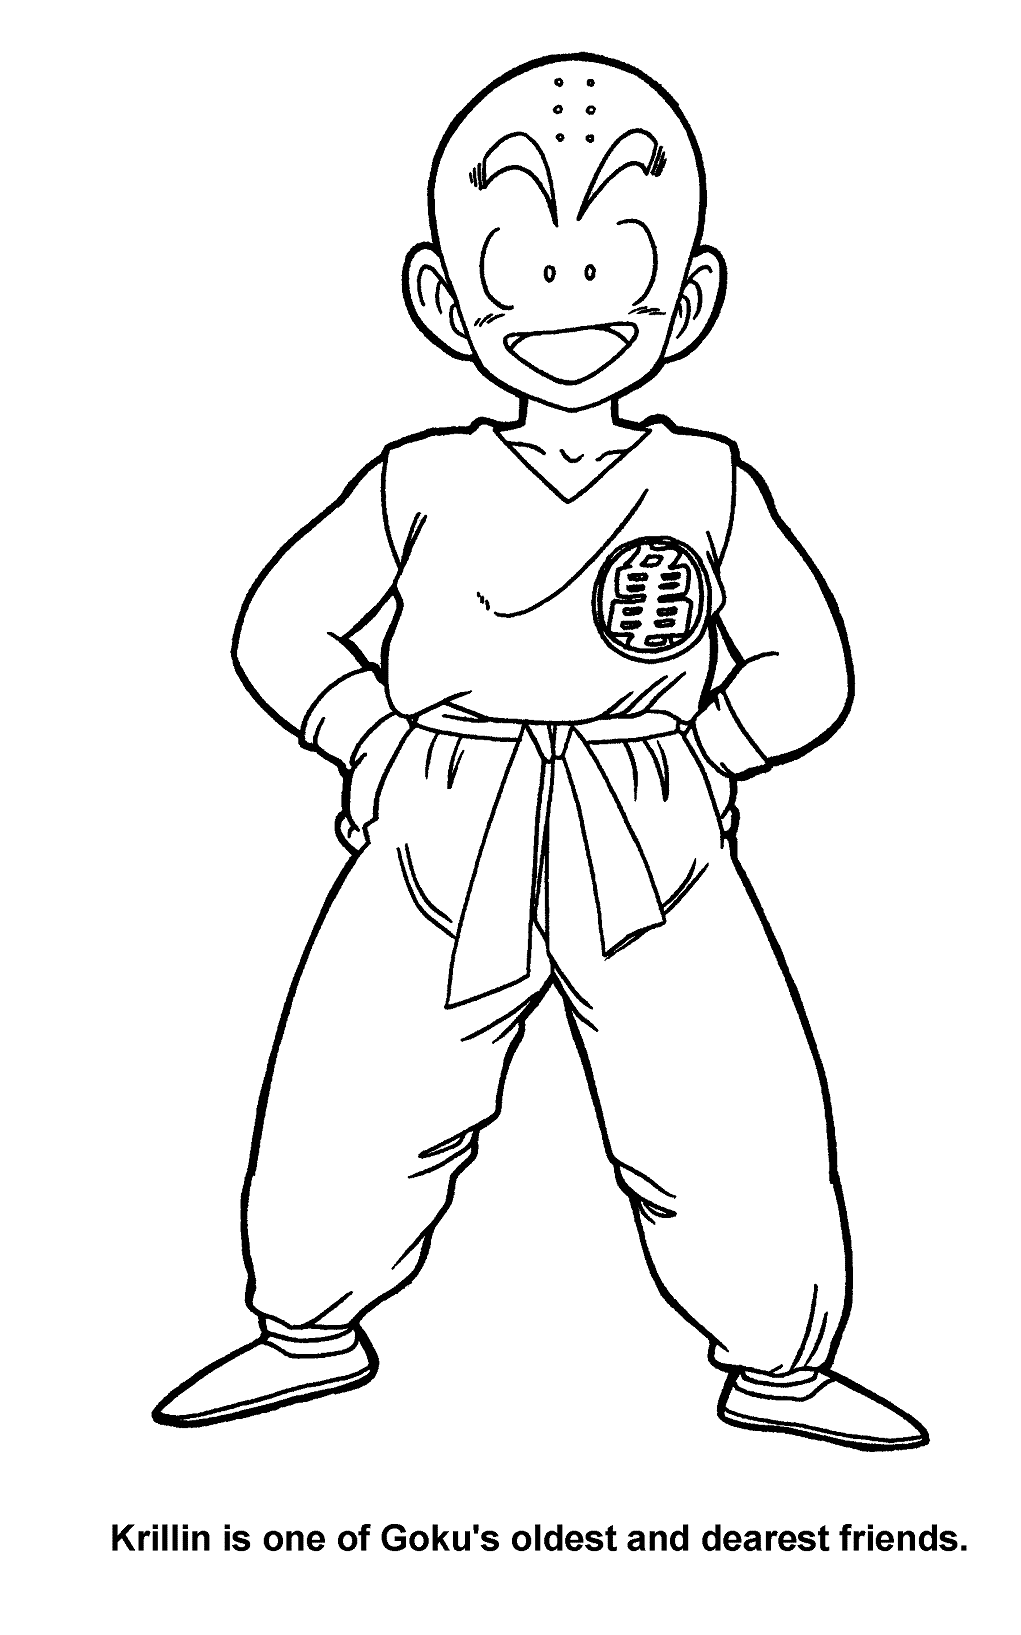 Krillin from Dragon Ball Z Coloring Pages - Dragon Ball Z Coloring Pages - Coloring  Pages For Kids And Adults